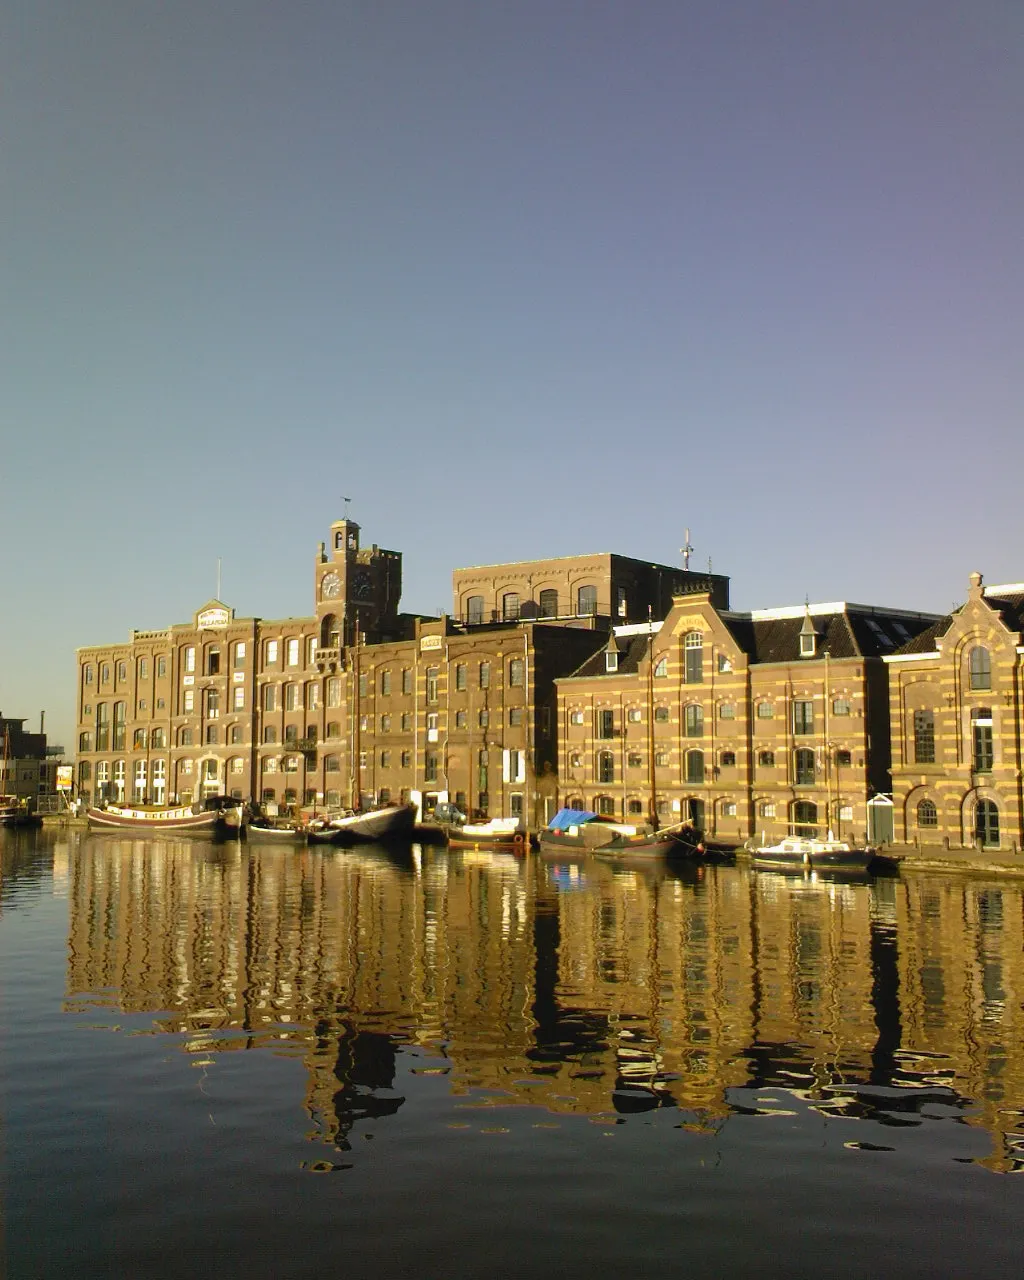 Photo showing: Some warehouses at the Zaan river, Wormer, The Netherlands.